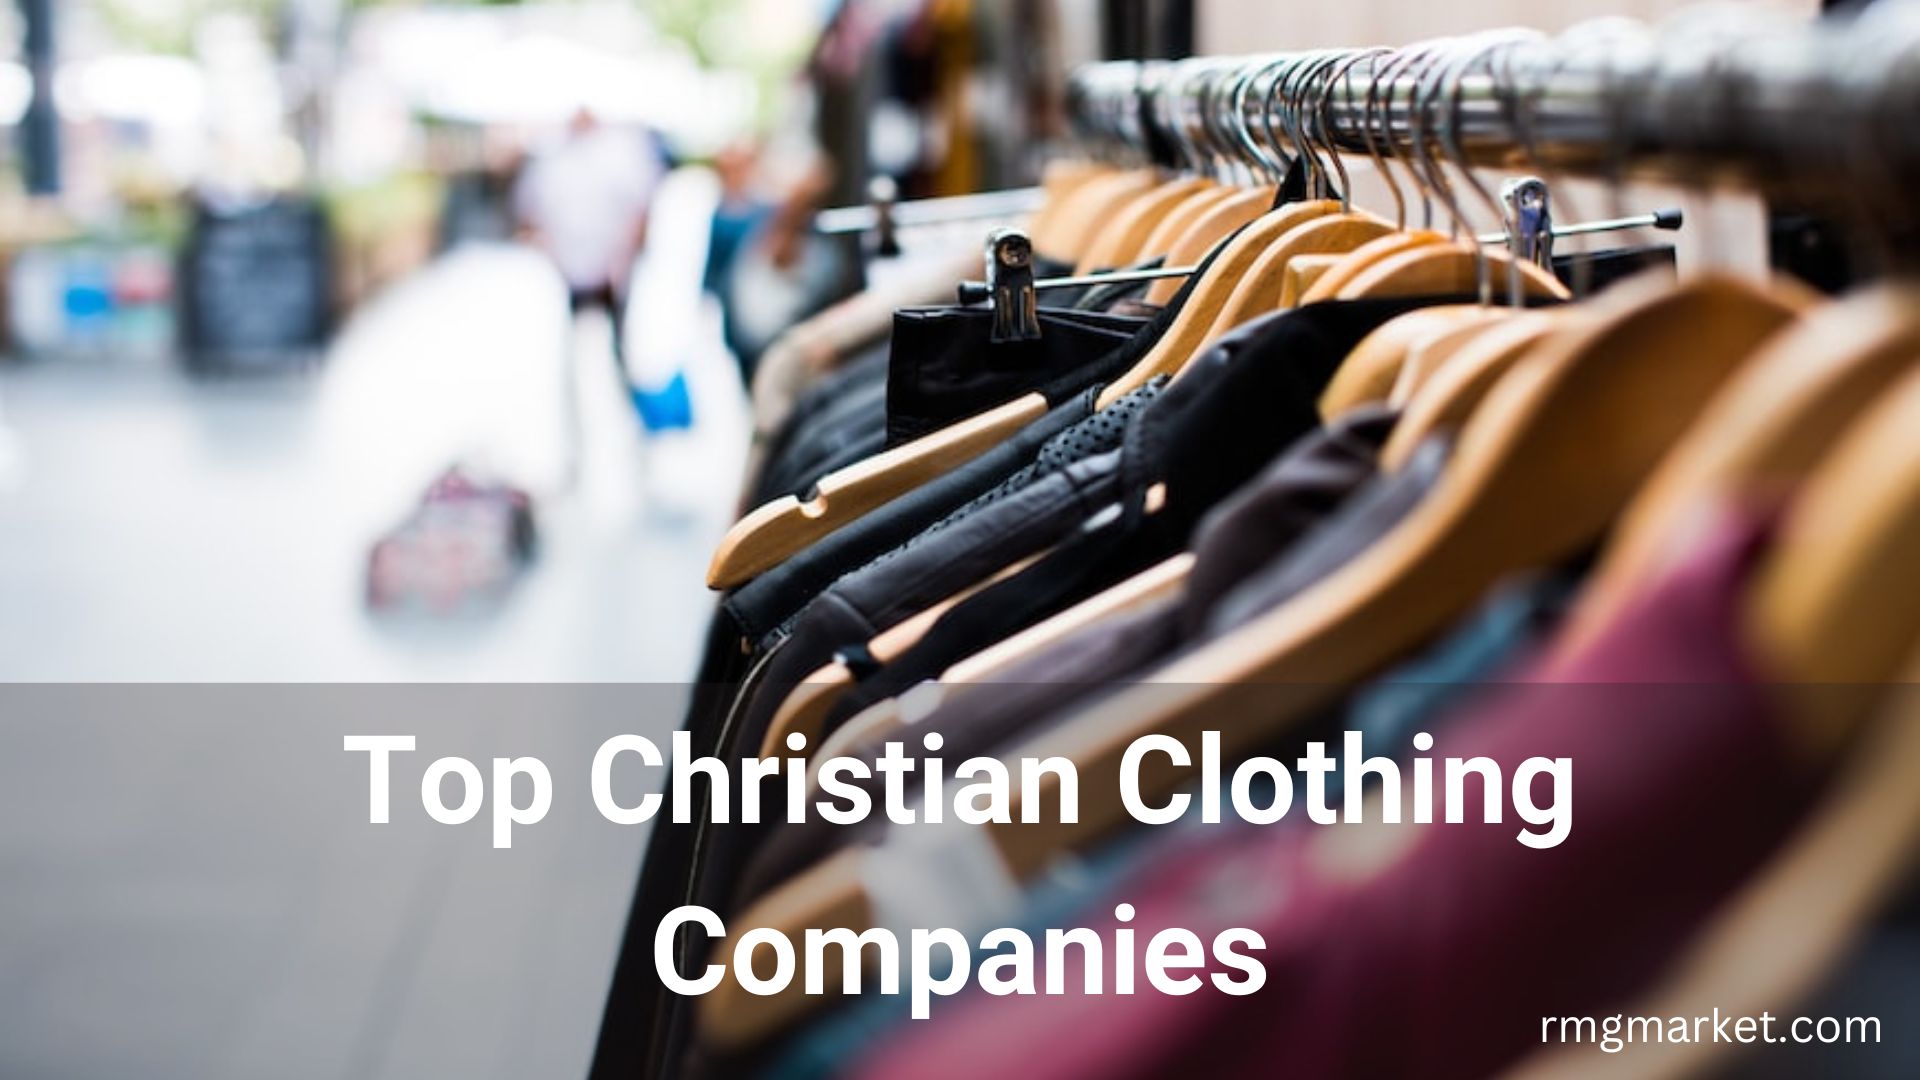 Top Christian Clothing Companies